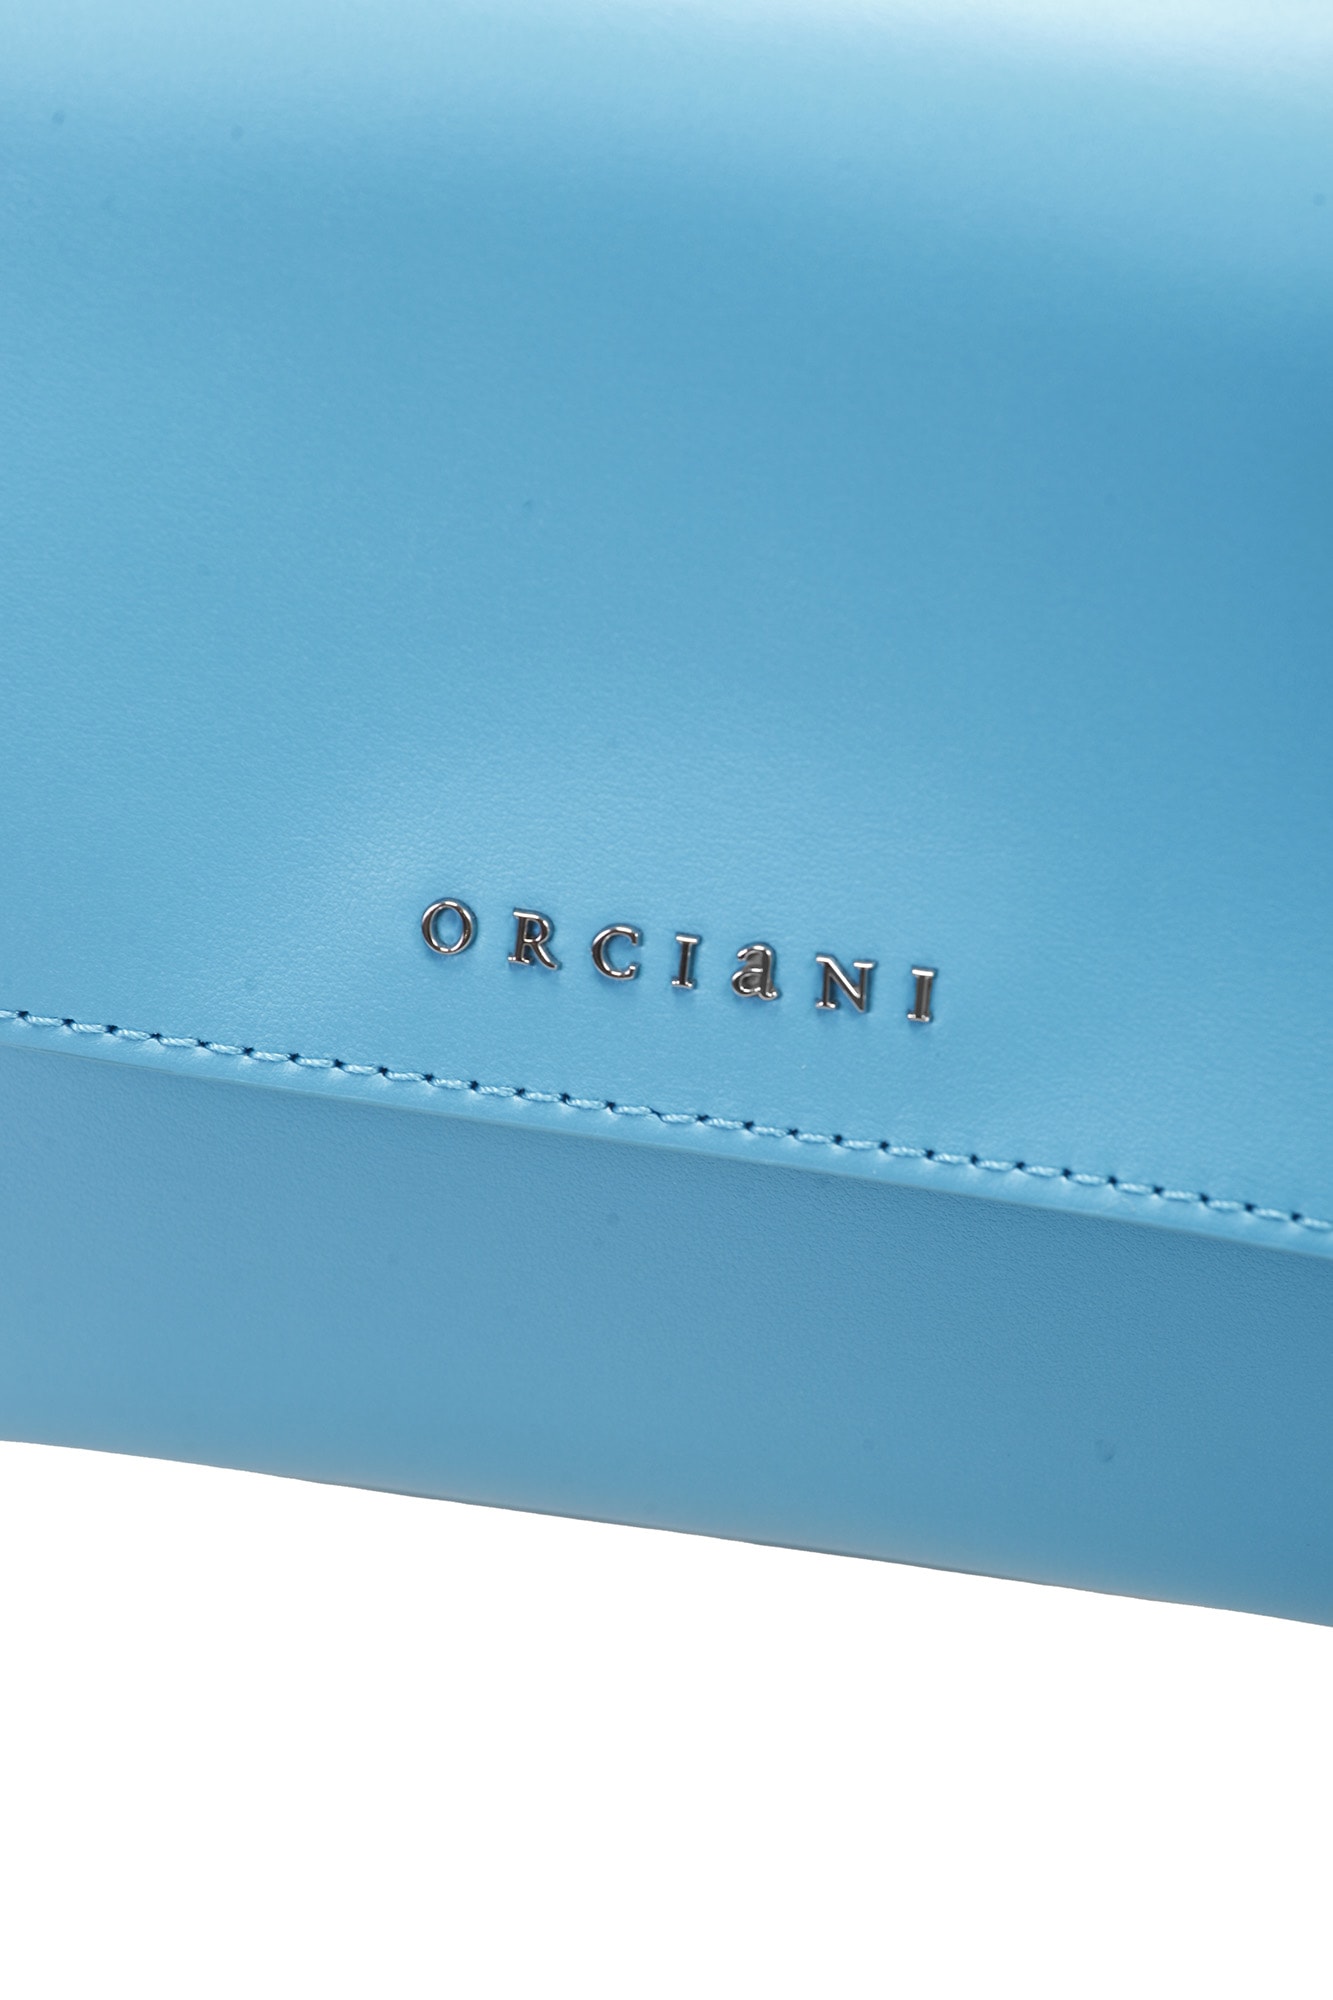 Shop Orciani Bags.. Turquoise